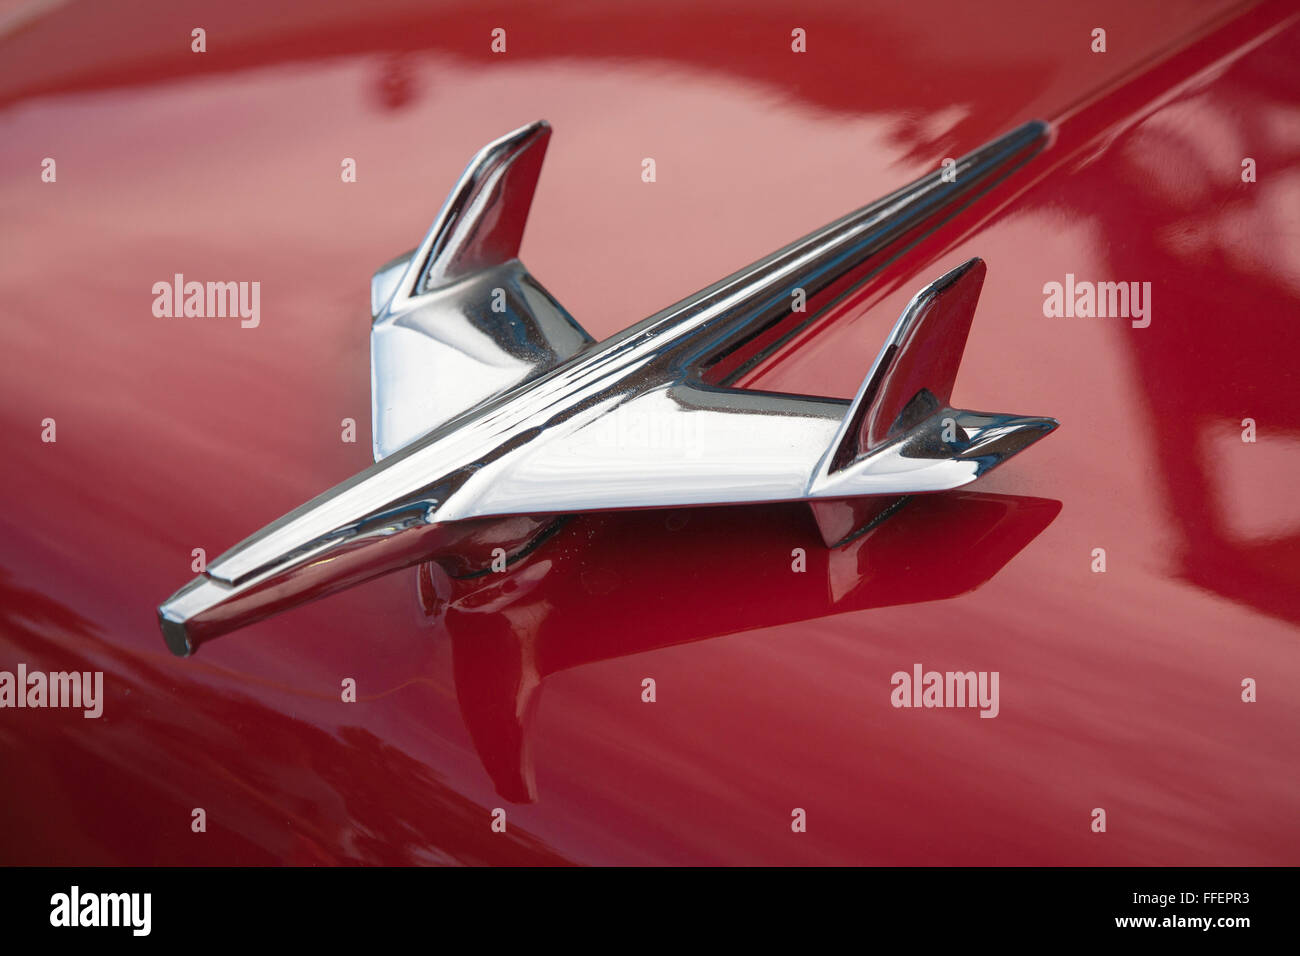 1955 Chevrolet hood ornament on car at Kissimmee Old Town weekly car cruise, Kissimmee Florida USA Stock Photo